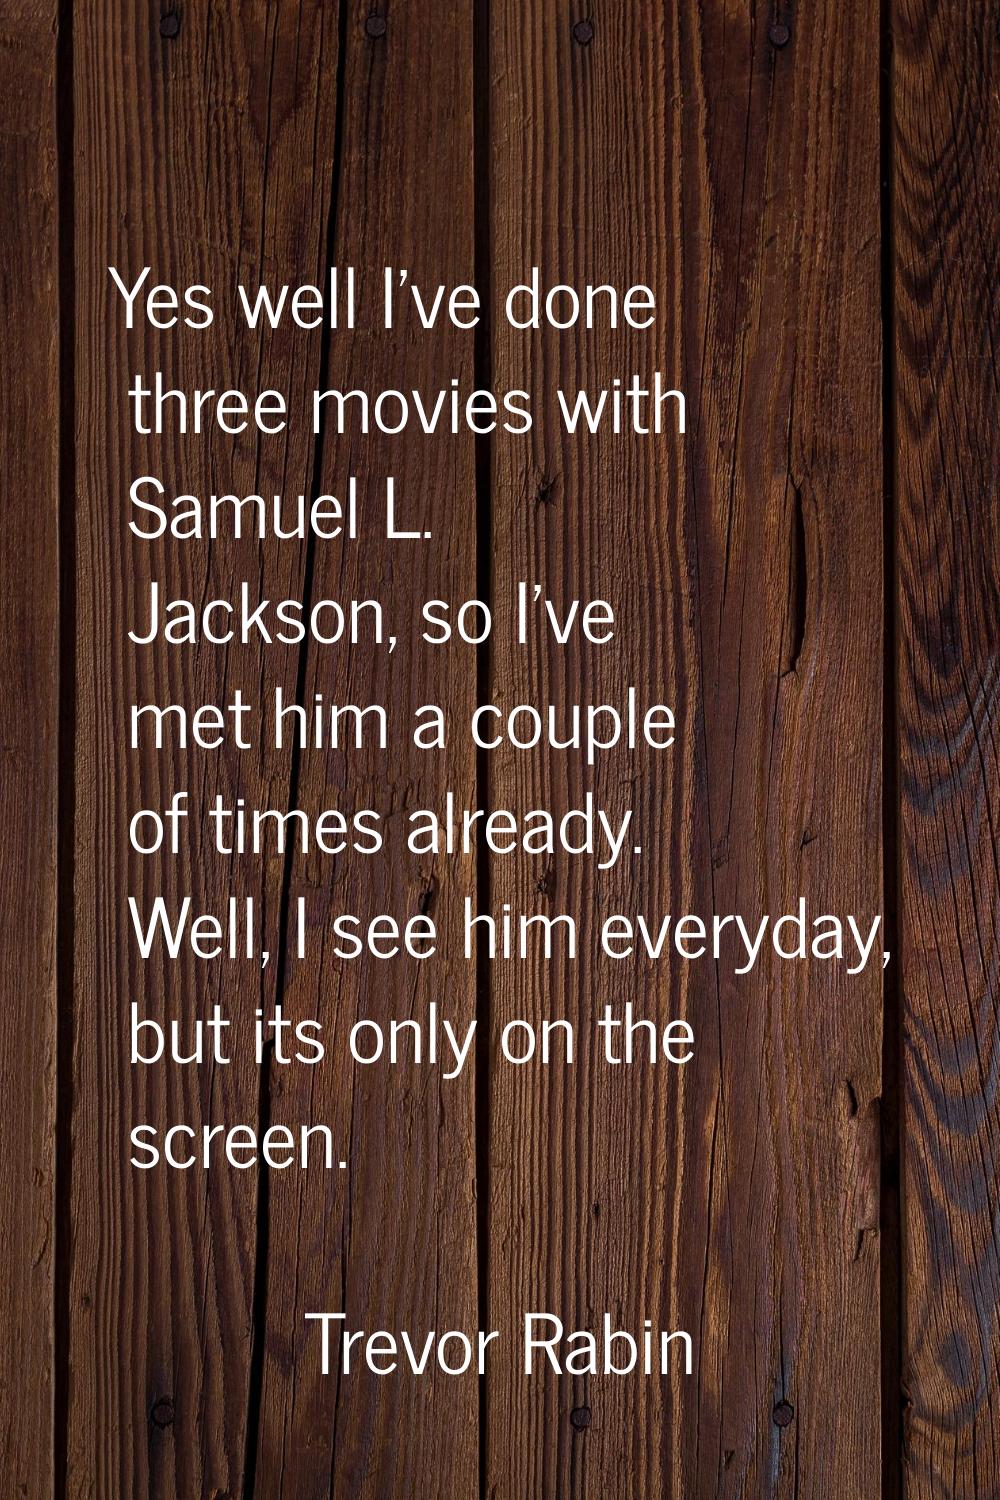 Yes well I've done three movies with Samuel L. Jackson, so I've met him a couple of times already. 